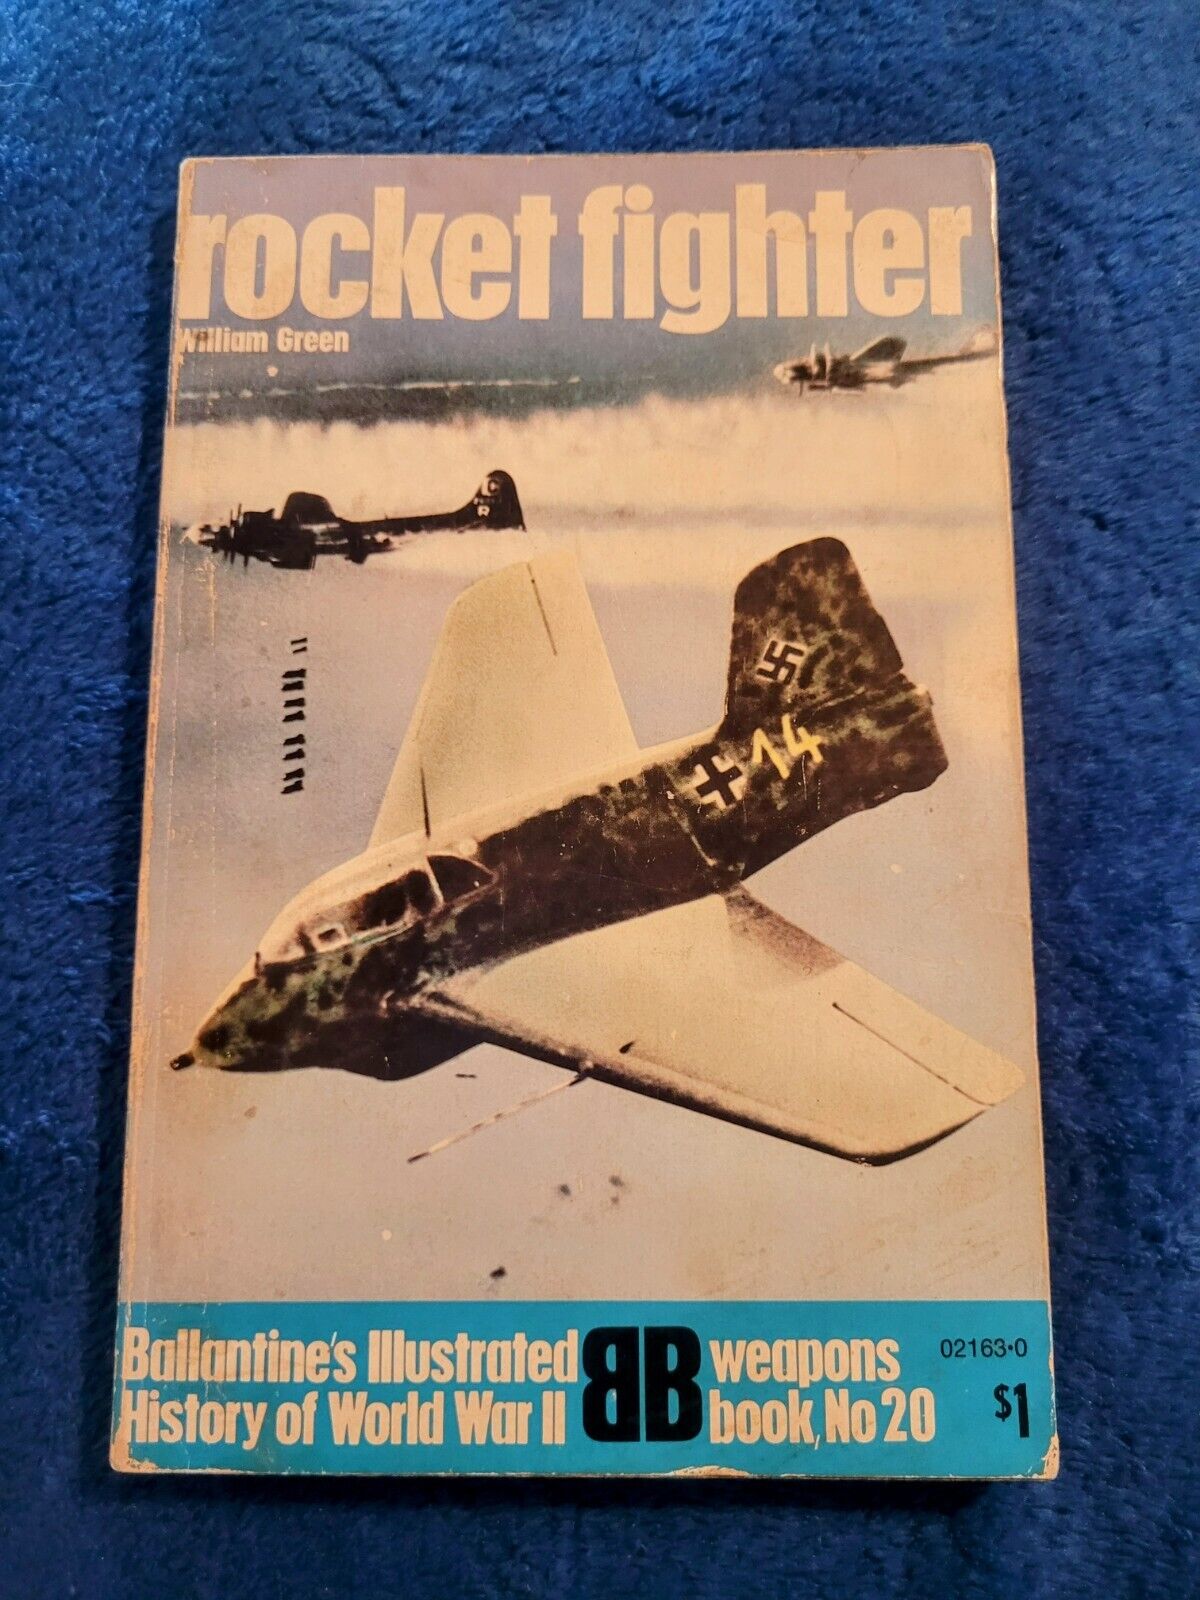 rocket fighter / Ballantine's Illustrated History of WWII / weapons No. 20